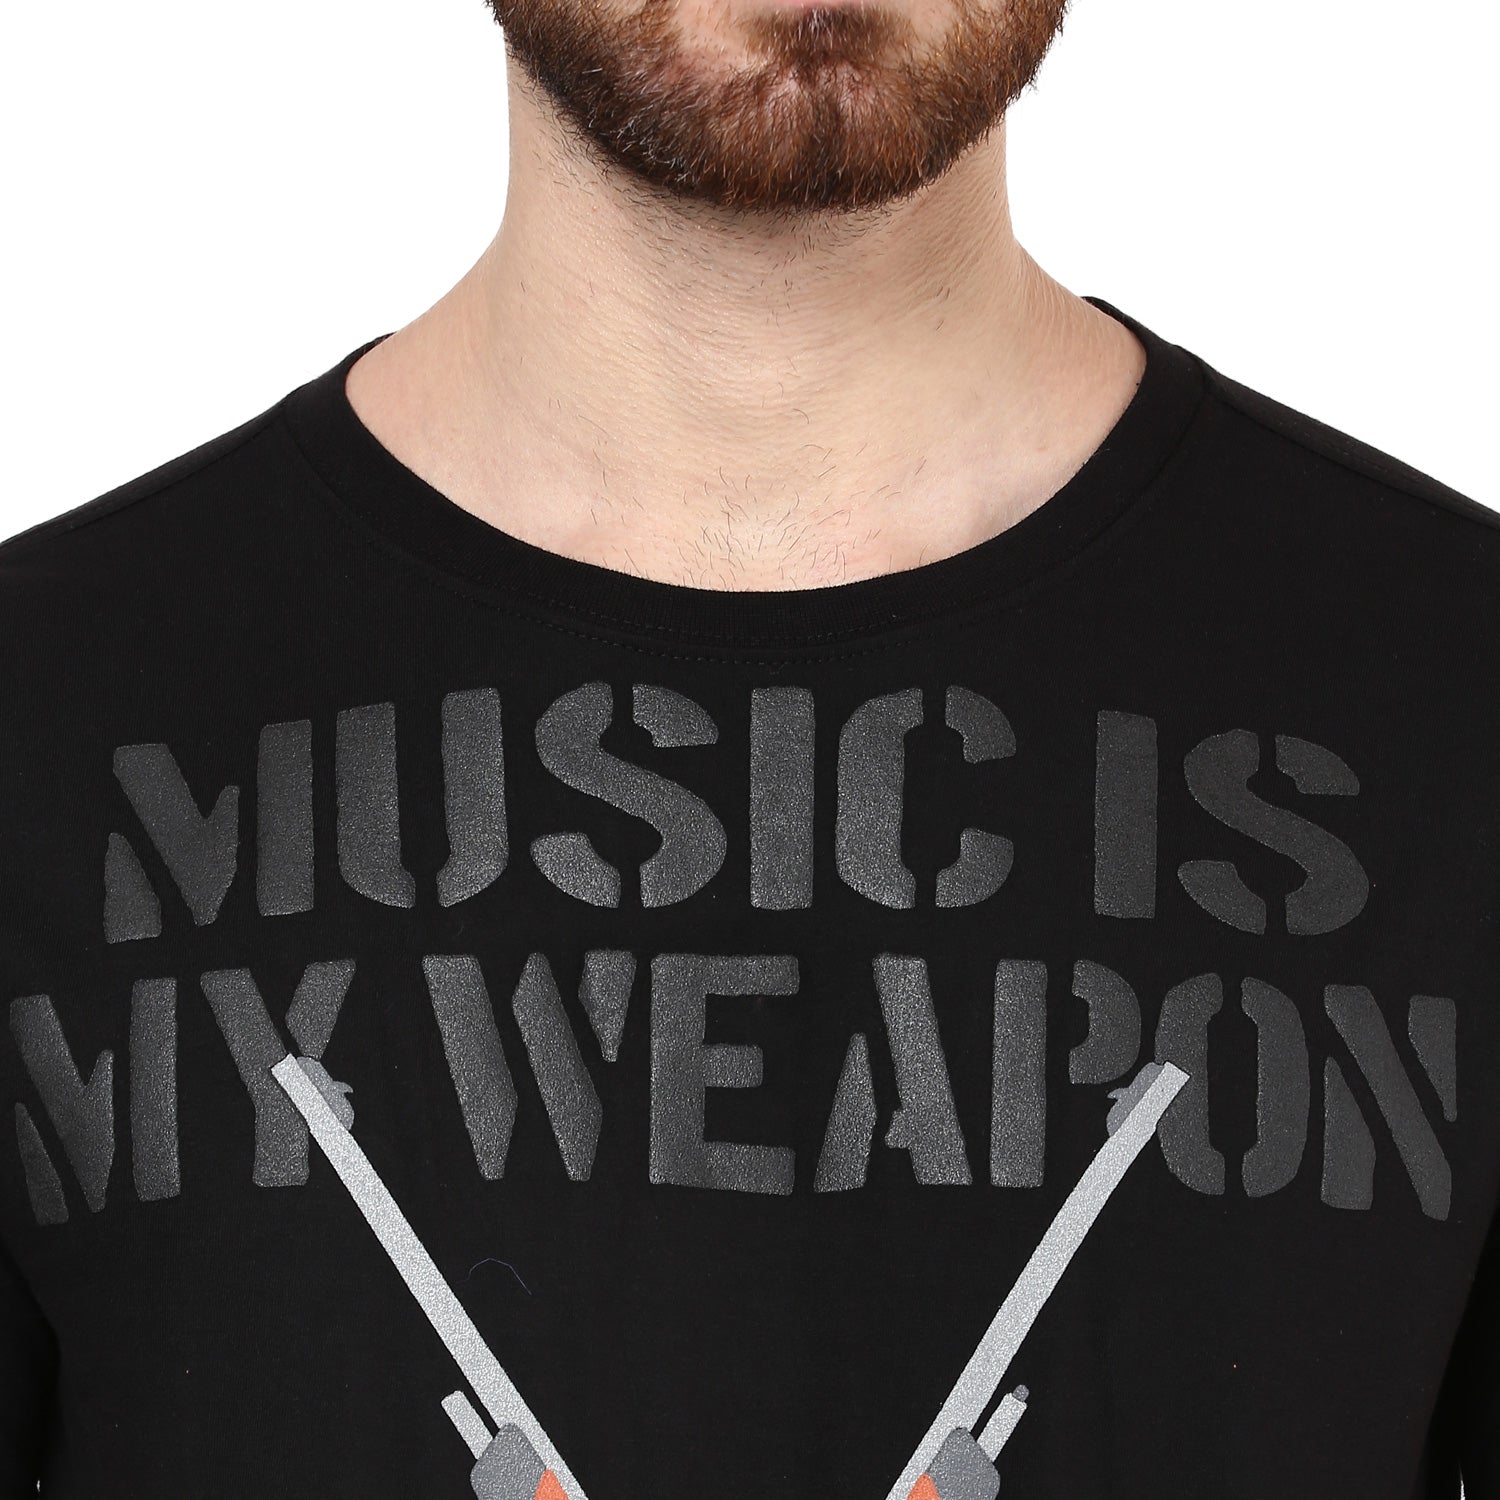 MUSIC-WEAPON